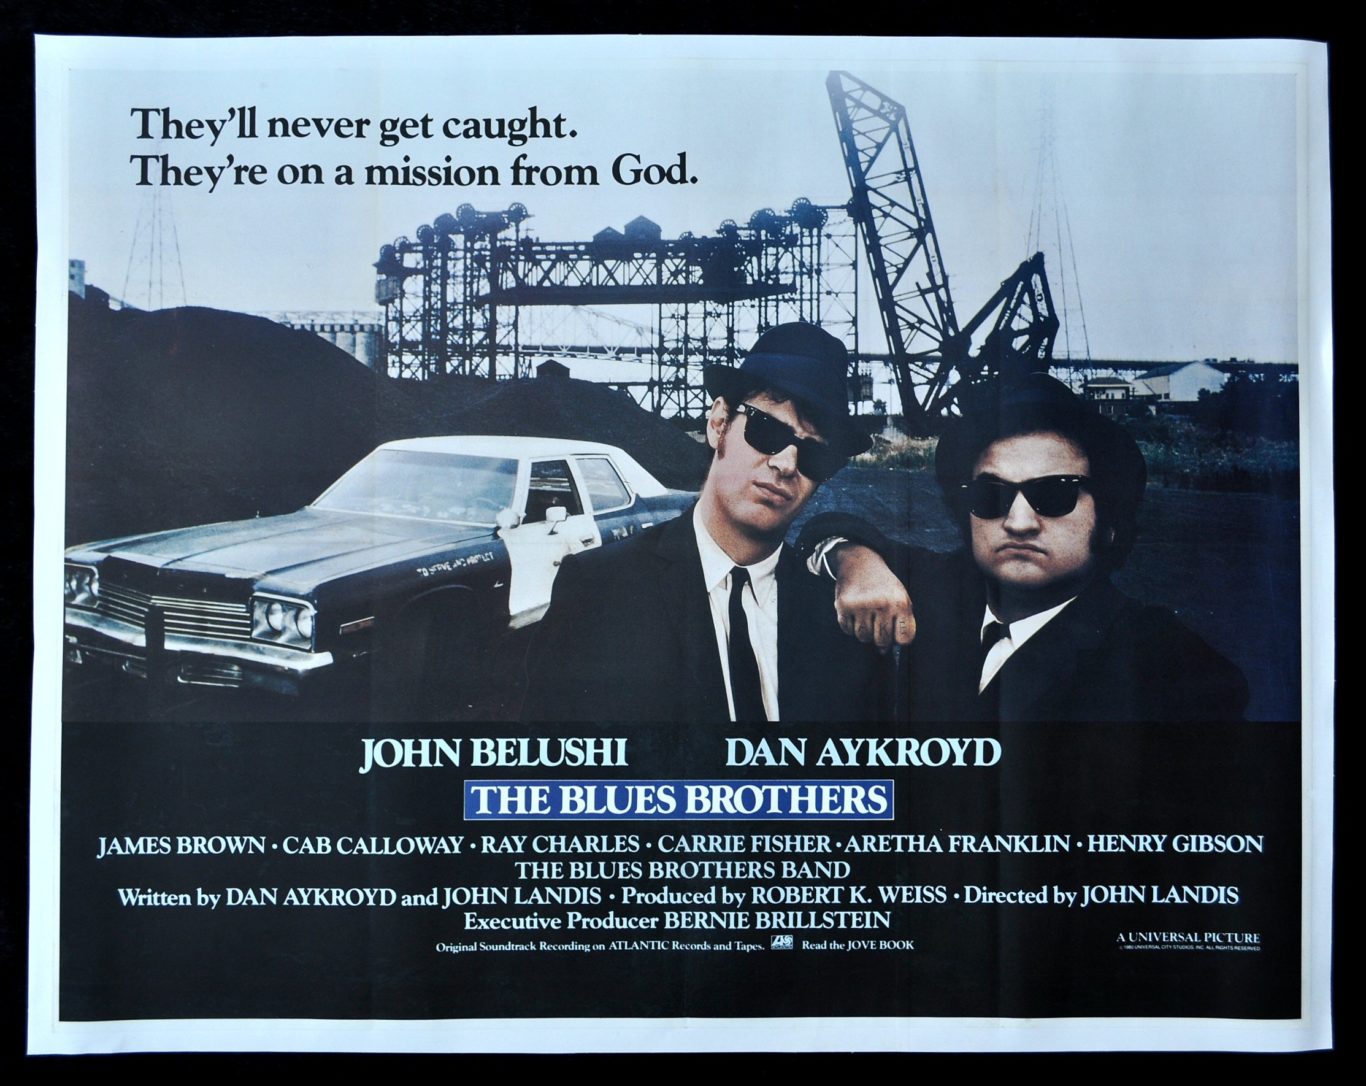 Blues Brothers is an icon of the silver screen